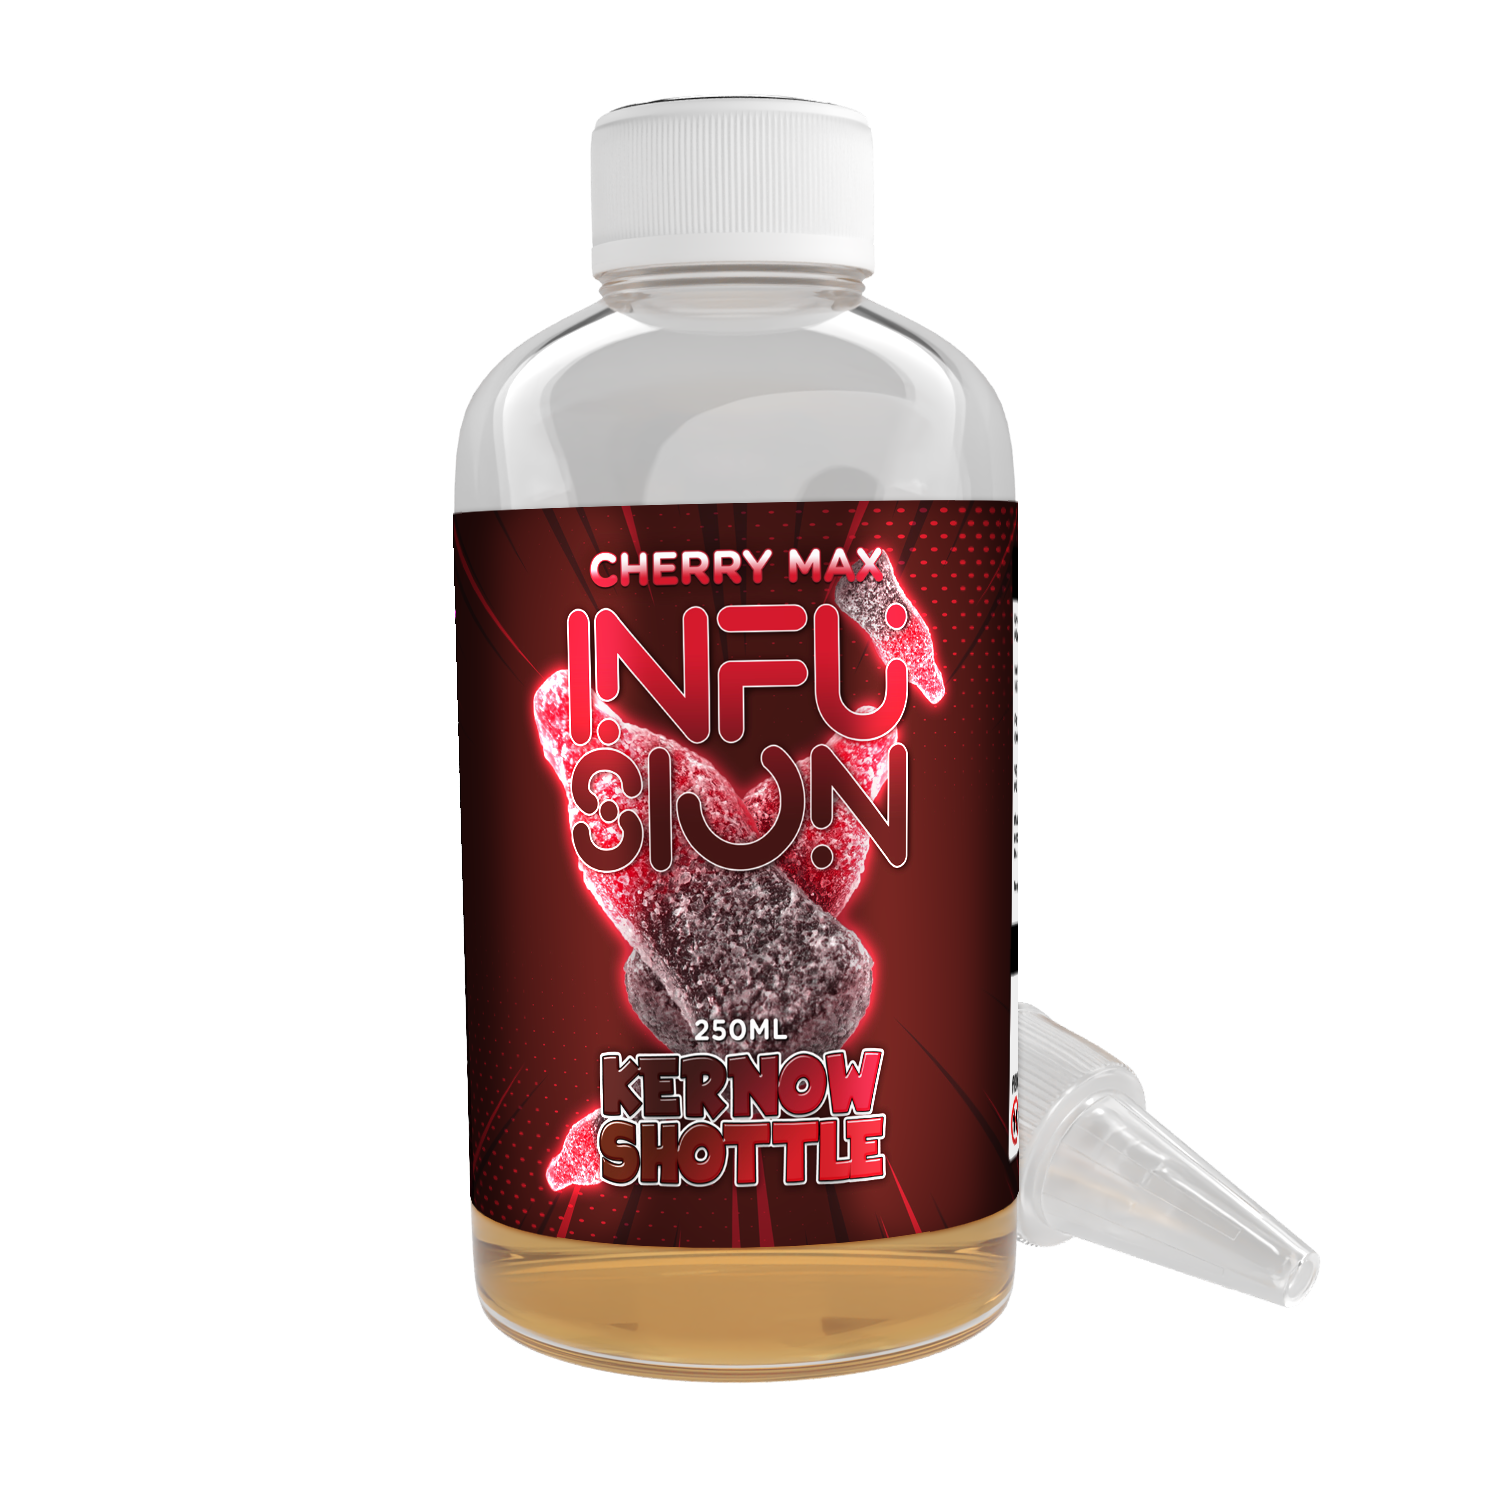 Cherry-Max Infusion Shottle Flavour Shot by Kernow - 250ml